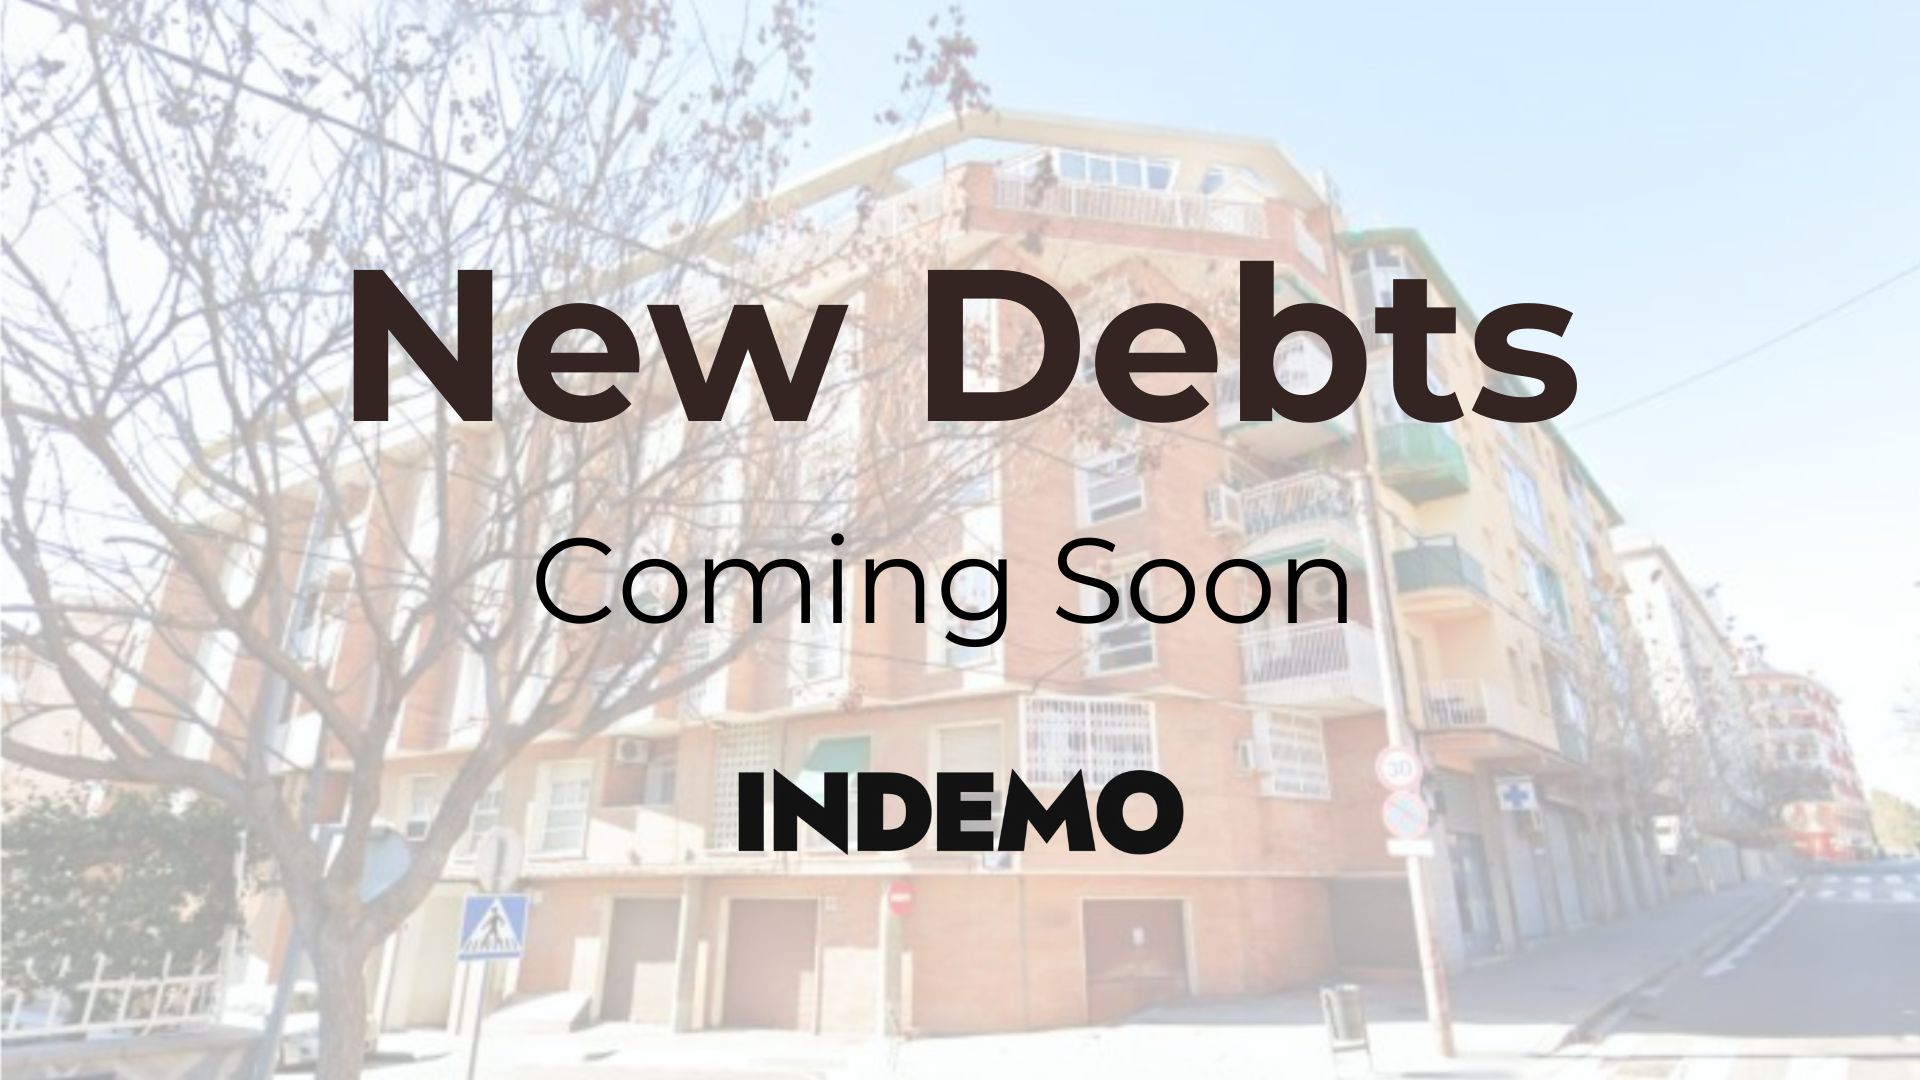 Two New Debts from Barcelona Coming Soon!